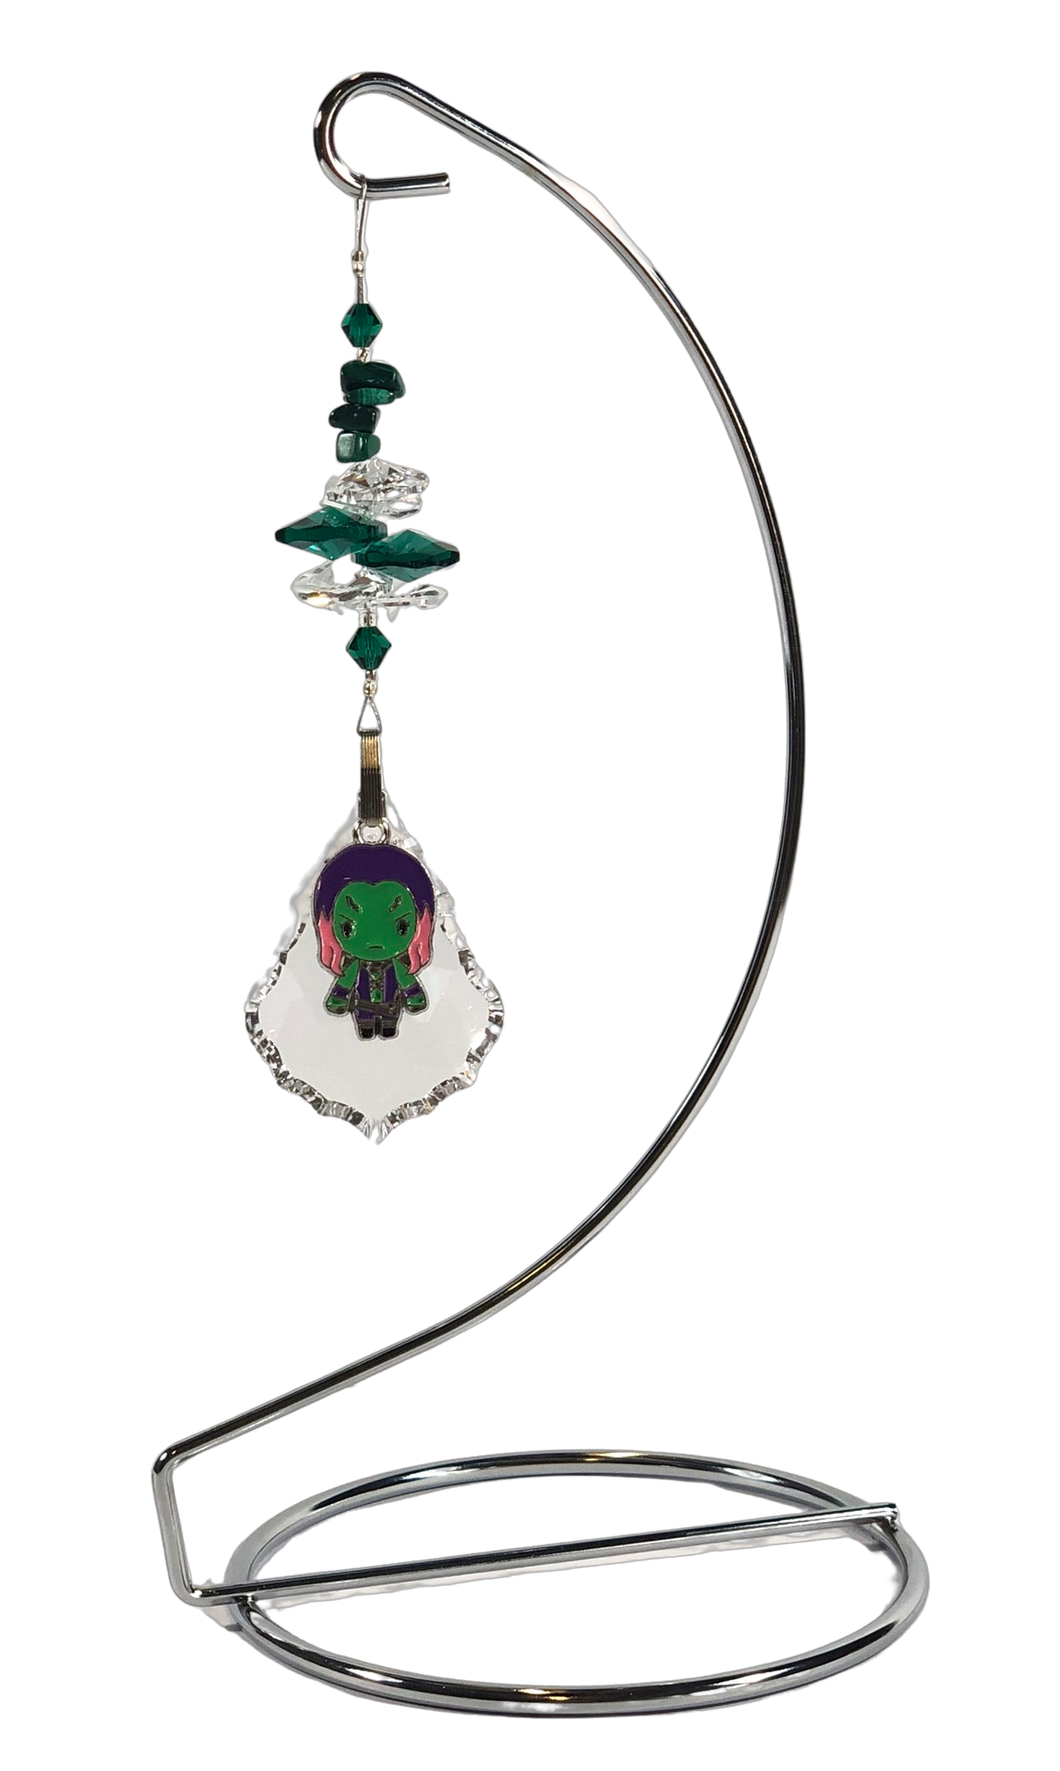 Guardians of the Galaxy - Gamora crystal suncatcher is decorated with malachite gemstones and come on this amazing stand.